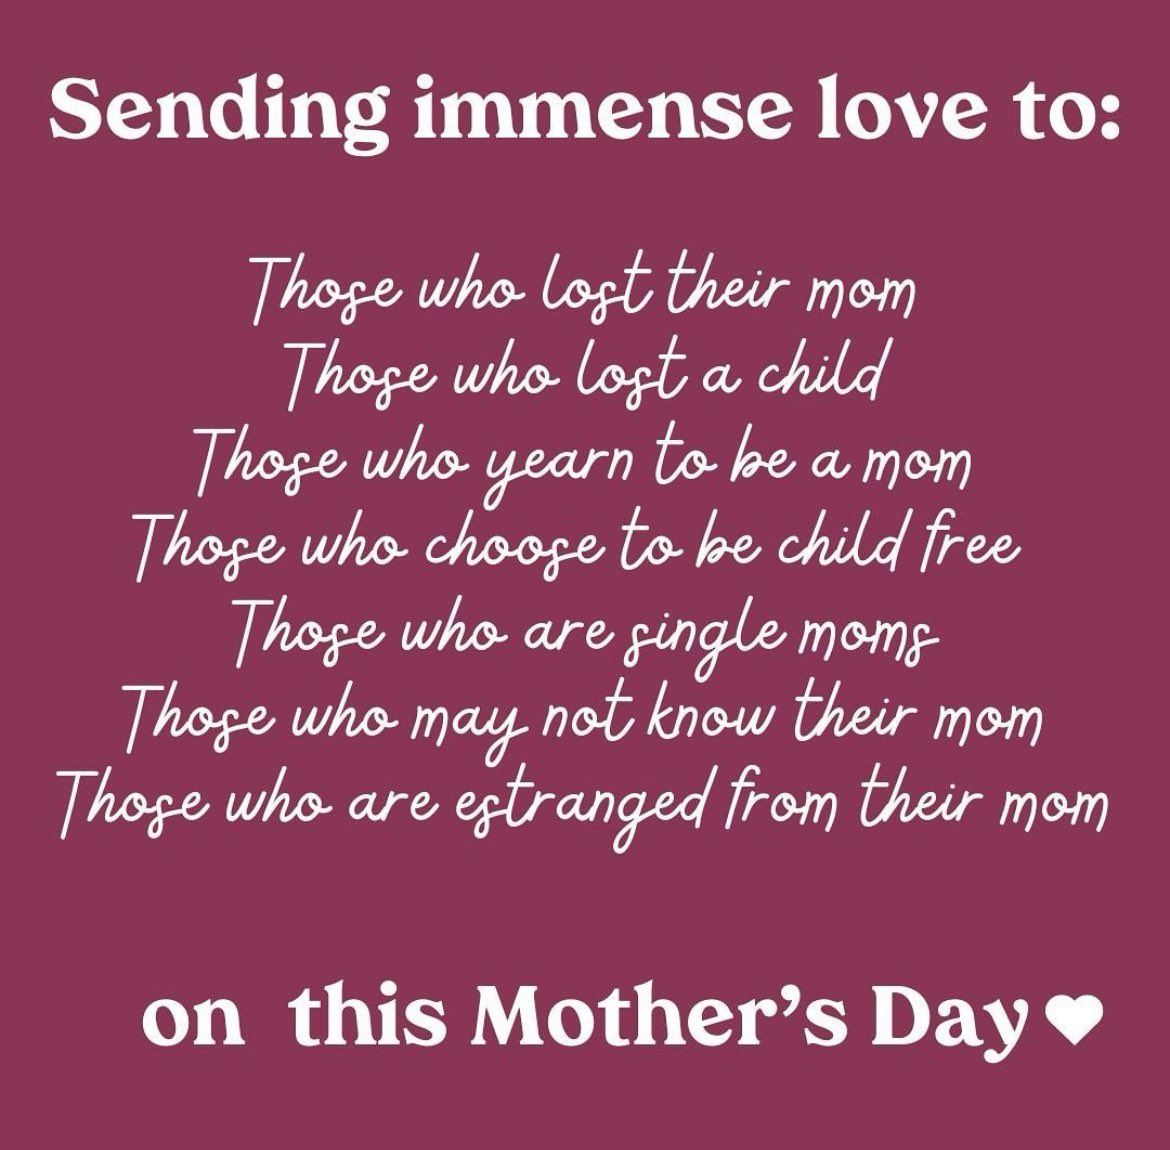 Celebrate Mothers Day with those you love!